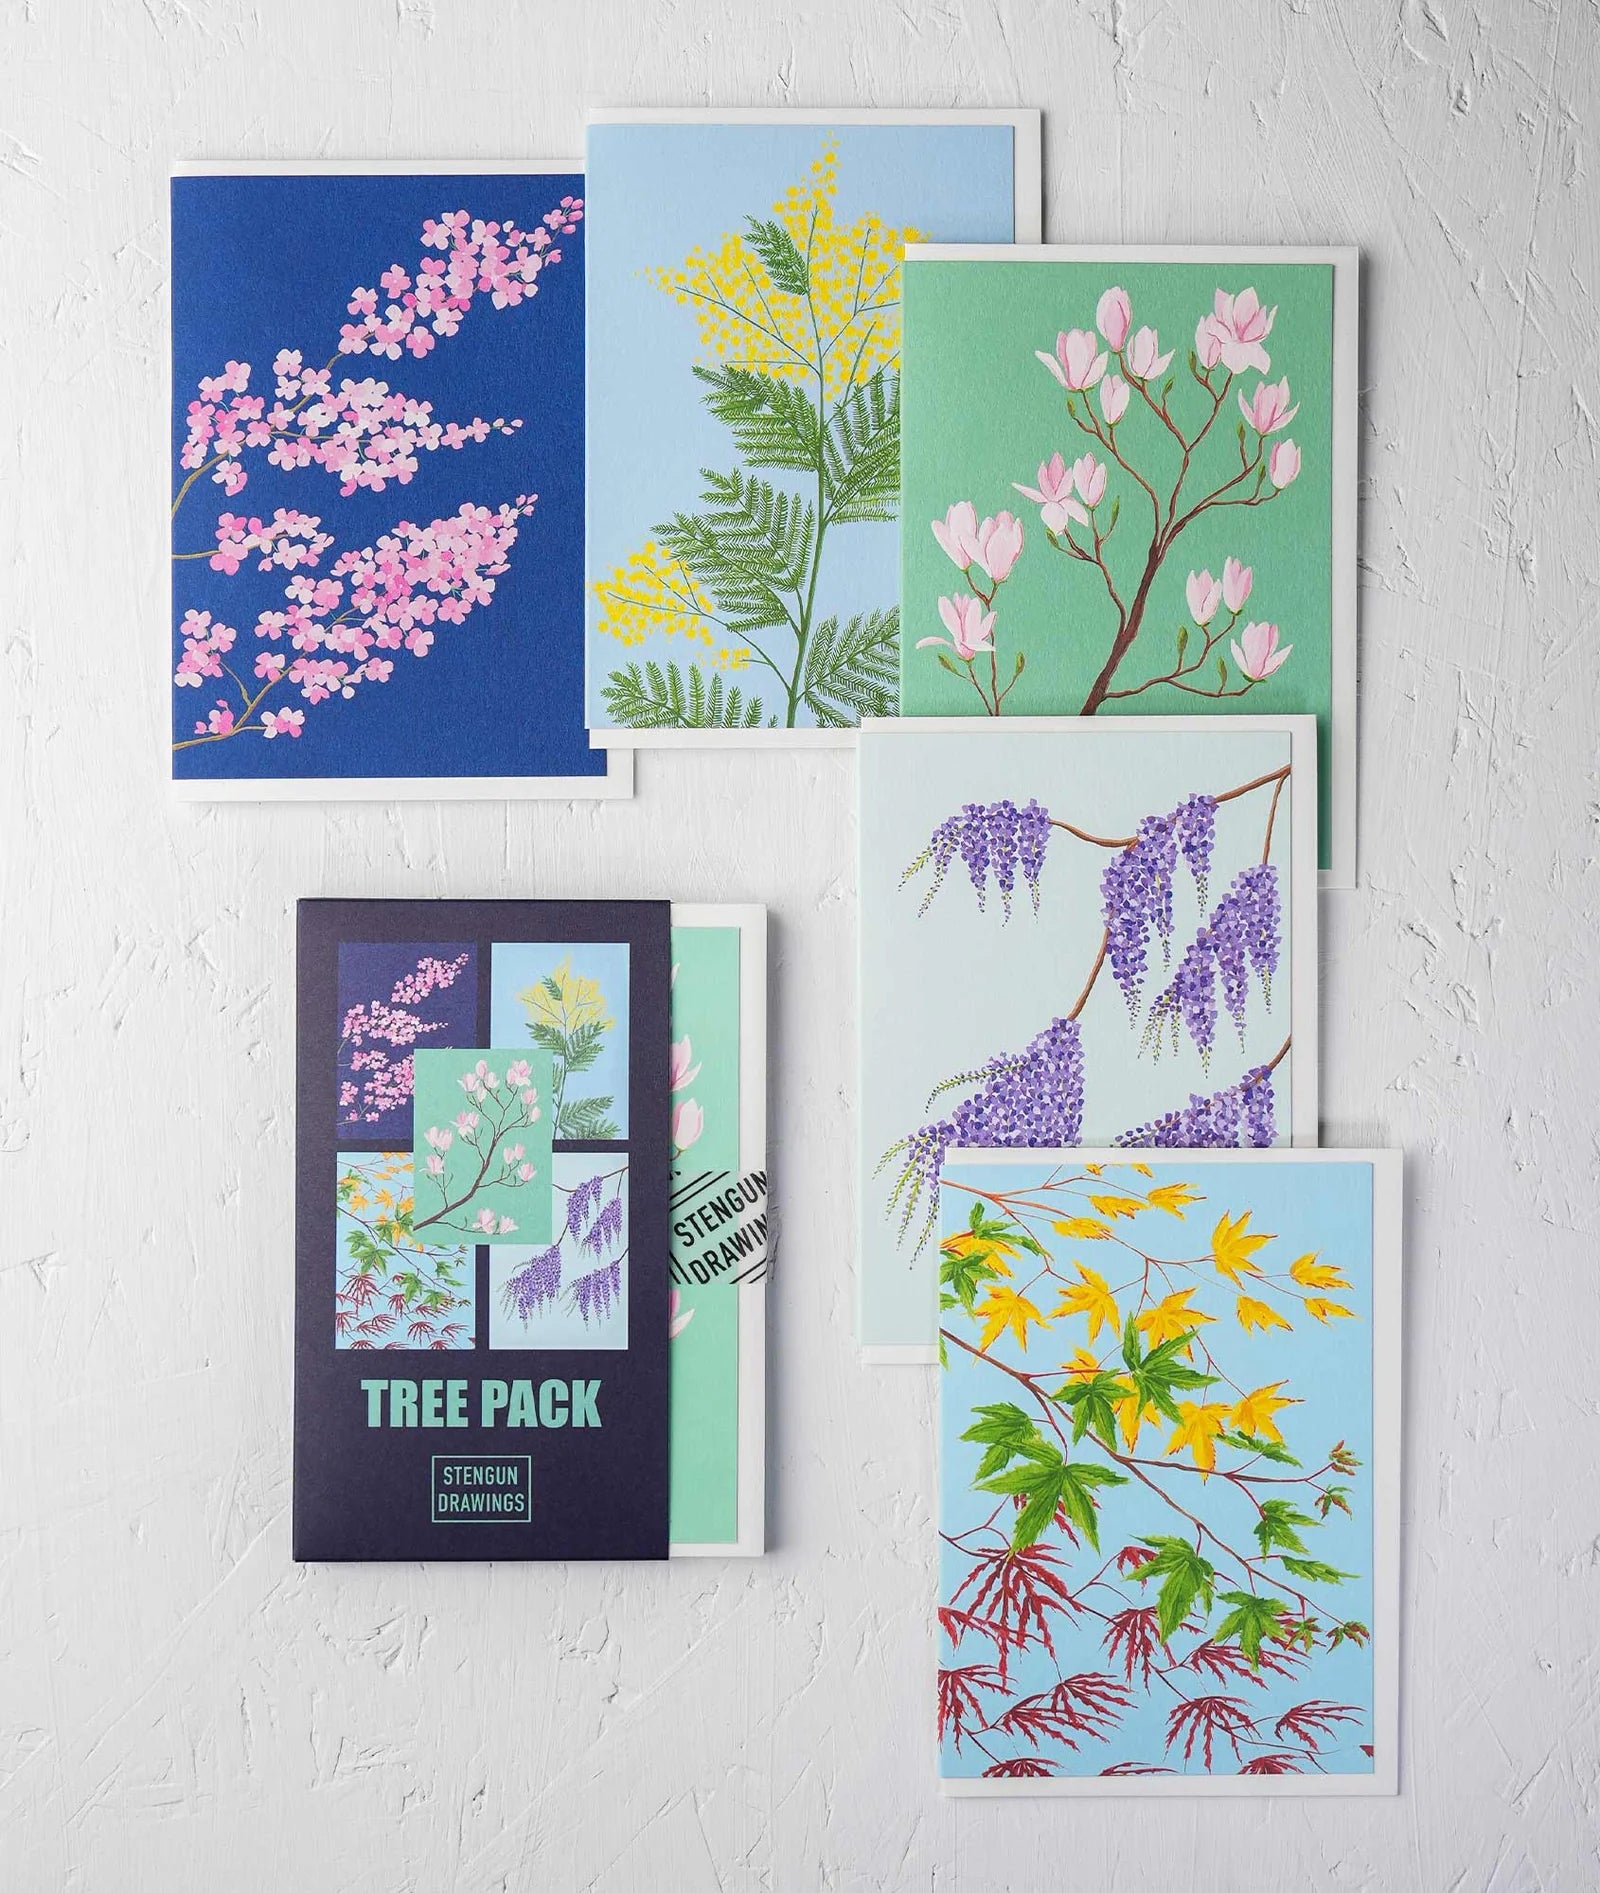 TREE PACK | CARDS BY STENGUN